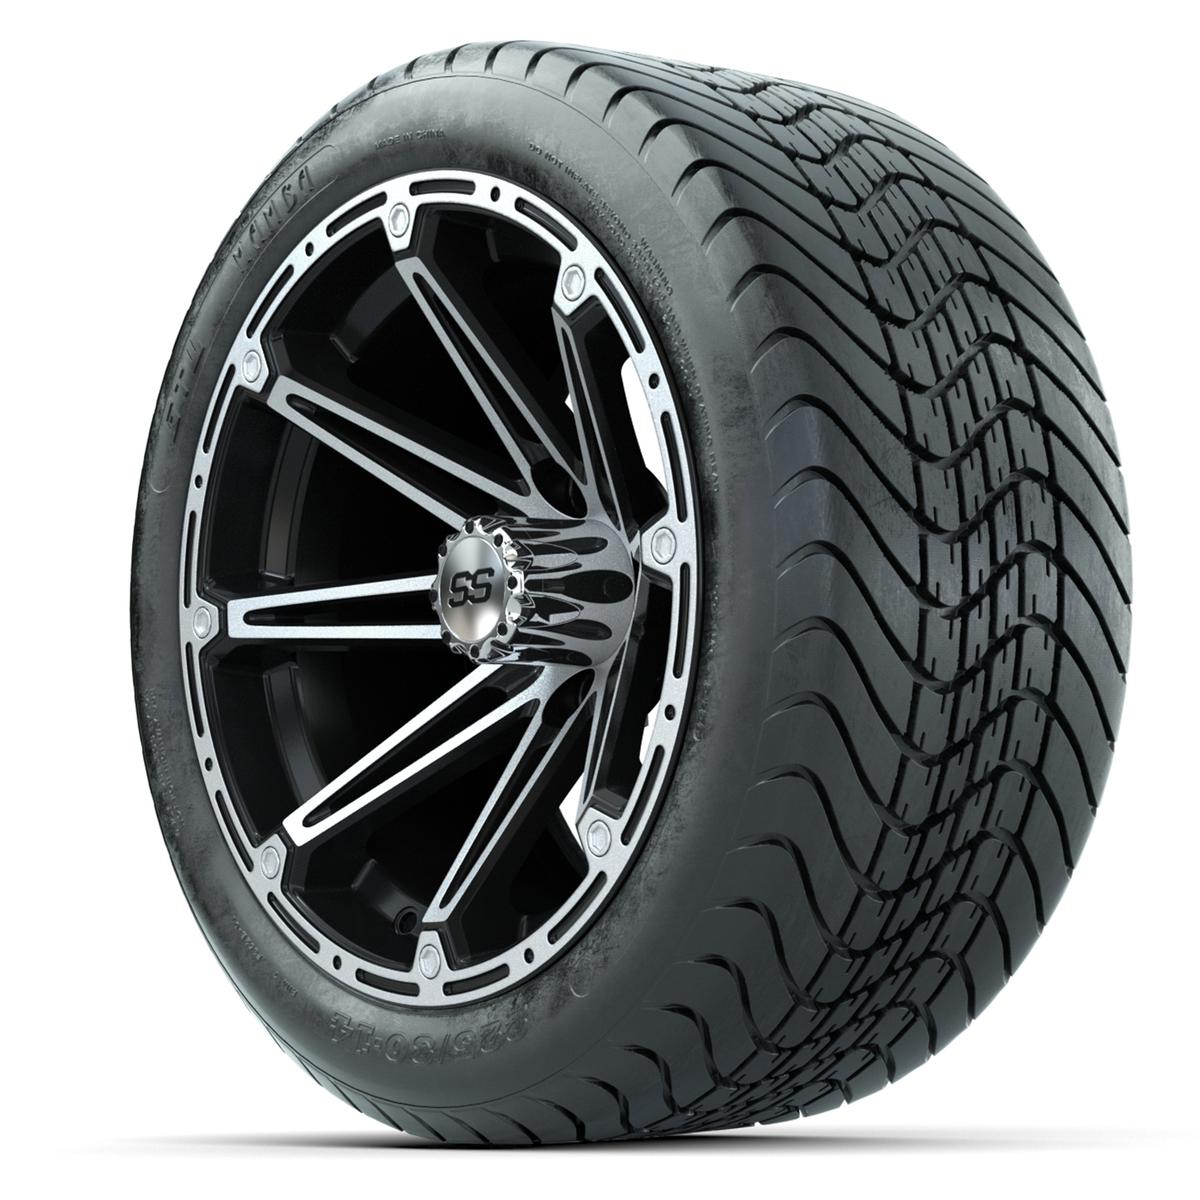 Set of (4) 14 in GTW Element Wheels with 225/30-14 Mamba Street Tires